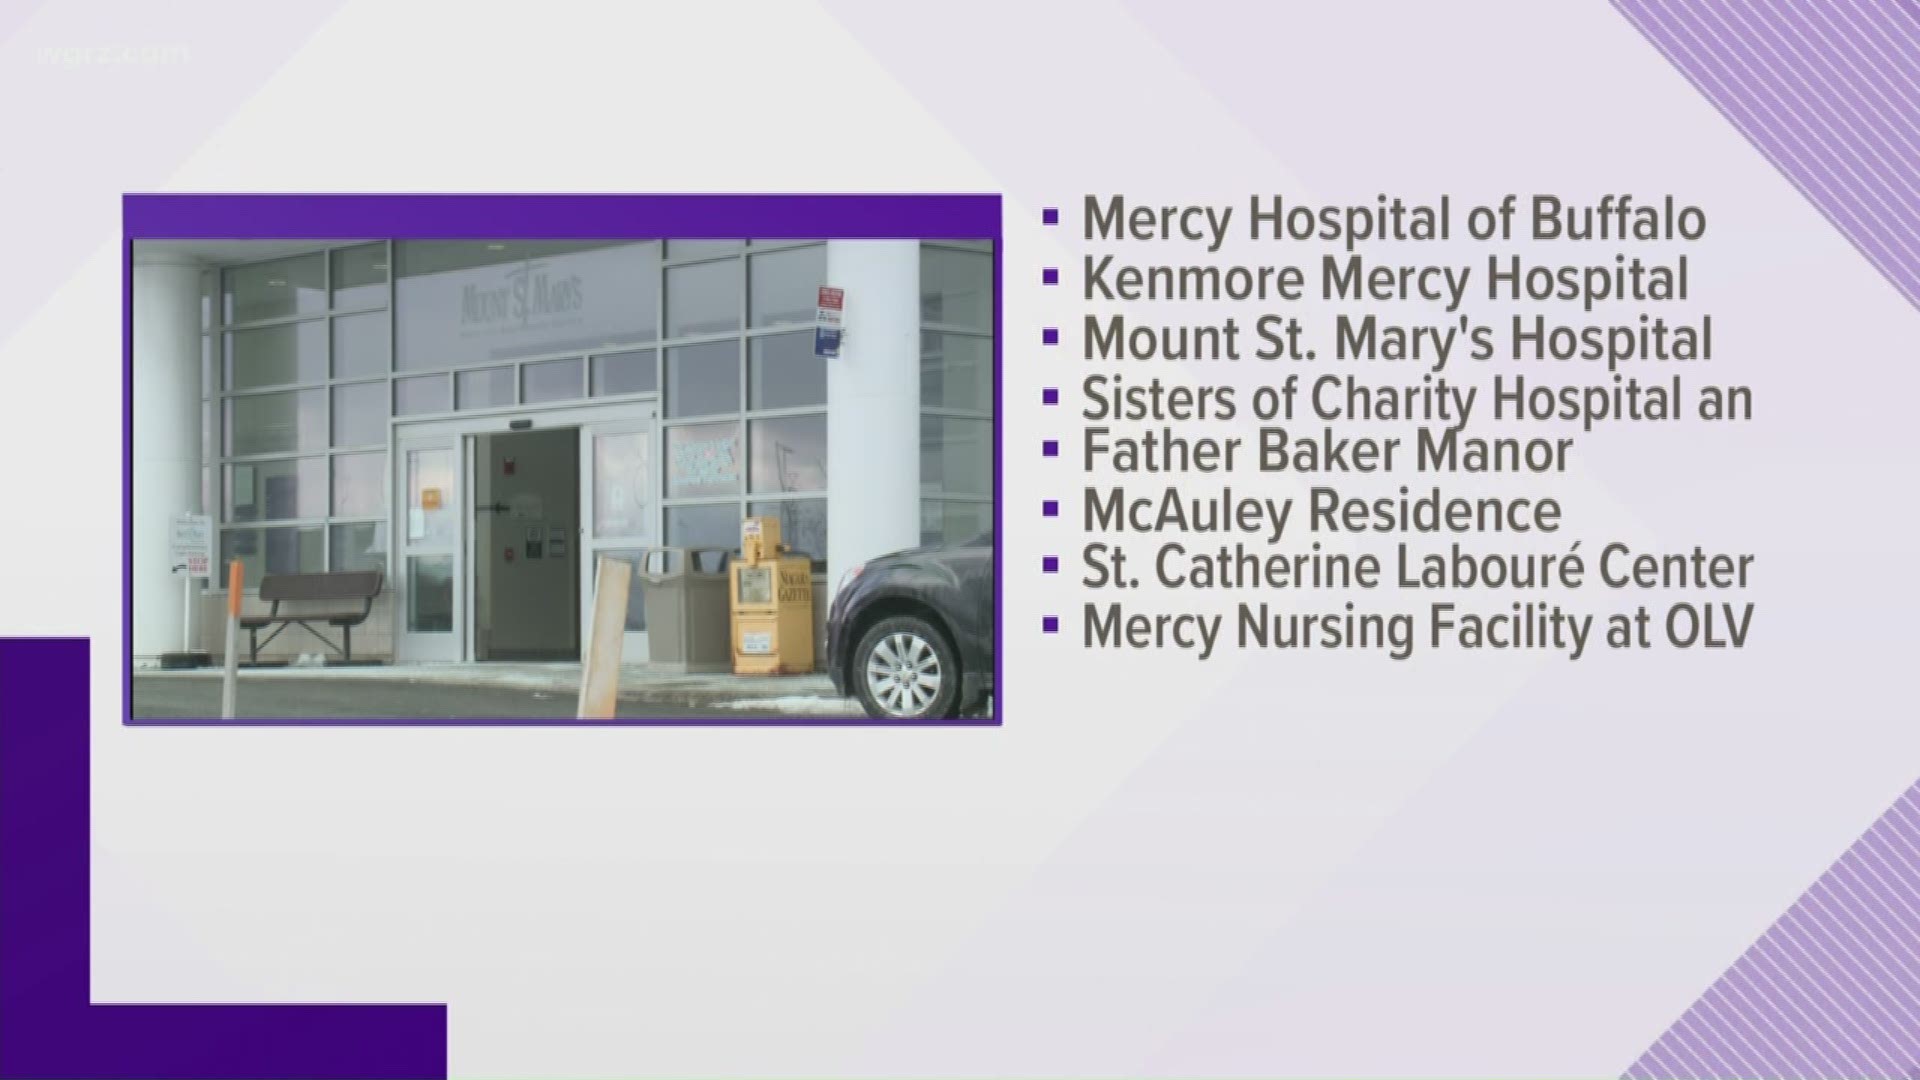 Catholic Health announced they are limiting their visiting hours at these local hospitals and nursing homes to stop the spread of illnesses.